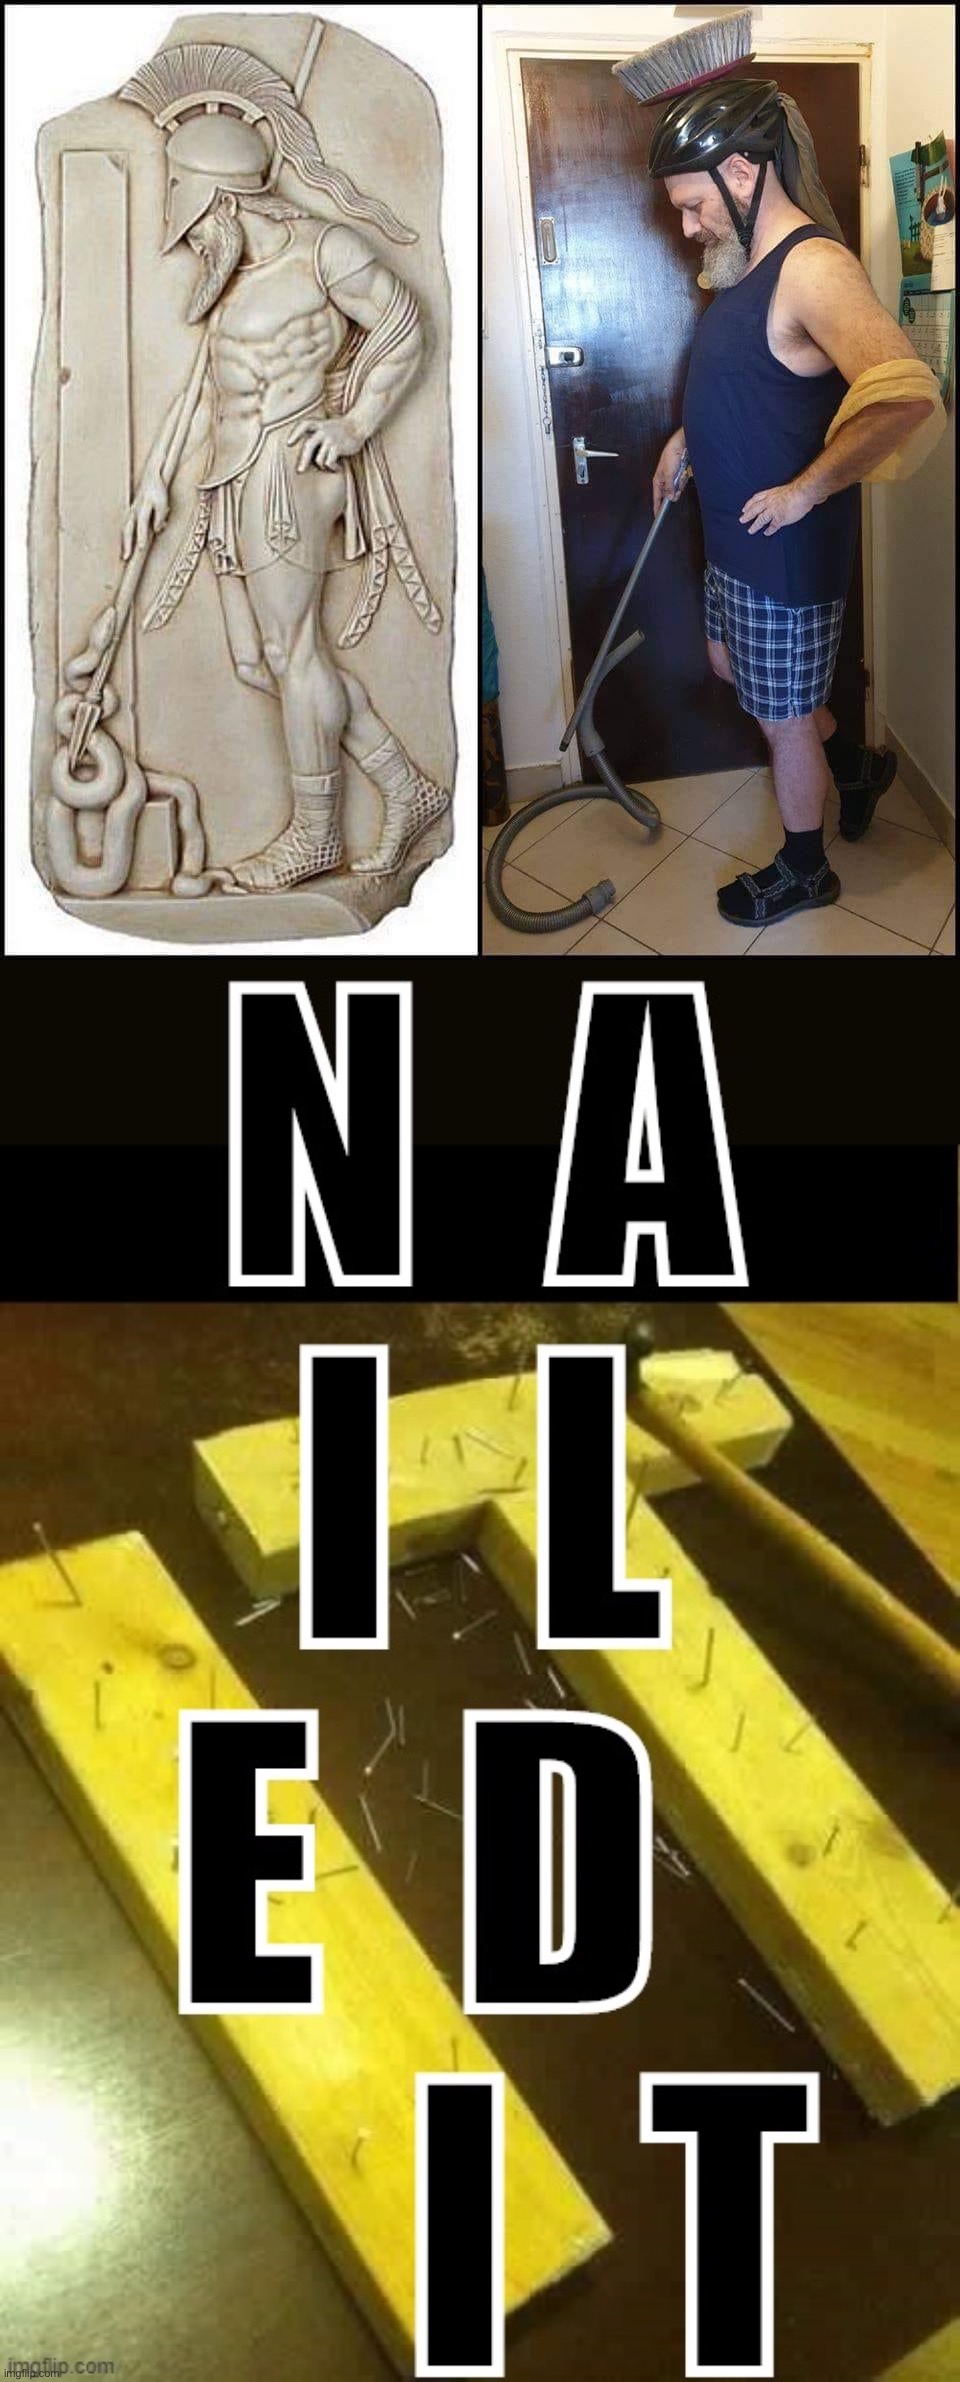 Bored Pandemic-Era Historical Re-Enactments Presents: | image tagged in ancient nailed it,nailed it w/ text redux,nailed it,ancient | made w/ Imgflip meme maker